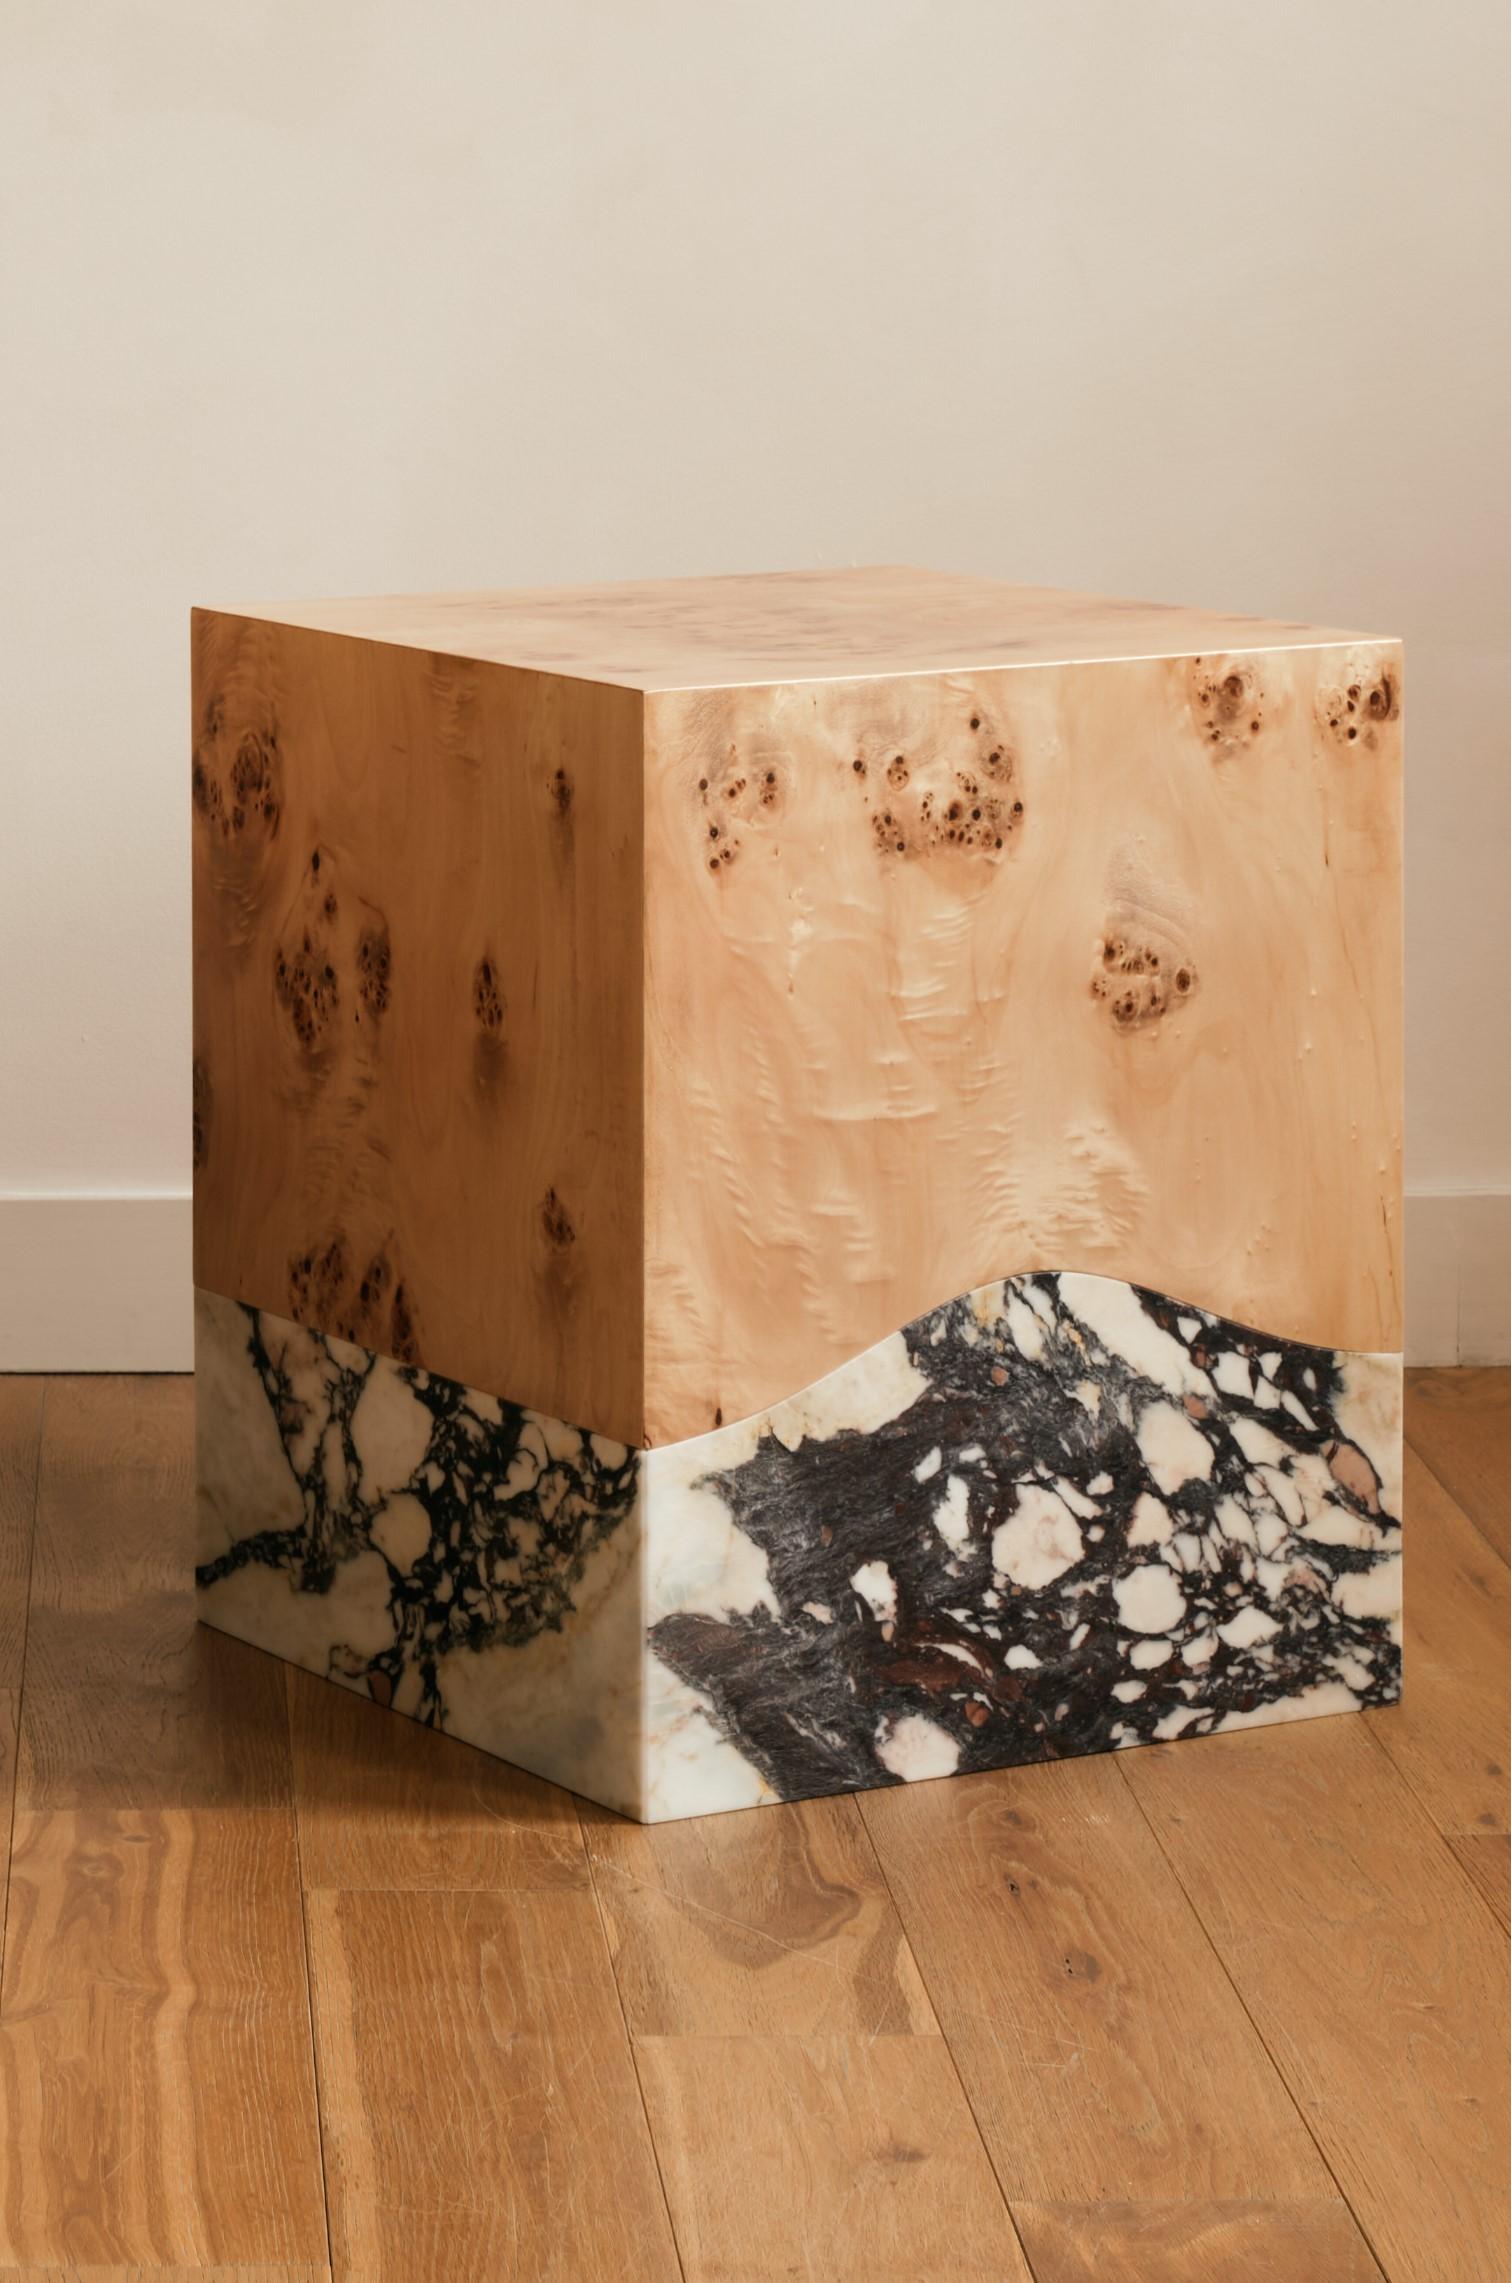 Cinque Terre Side Table by Studio Sam London
Dimensions: W 40 x D 40 x H 50 cm
Materials: Arabescato Viola Marble and Burr Timber

The Cinque Terre side table is inspired by the region of Liguria, where the flavours reflect the scent of the sea and